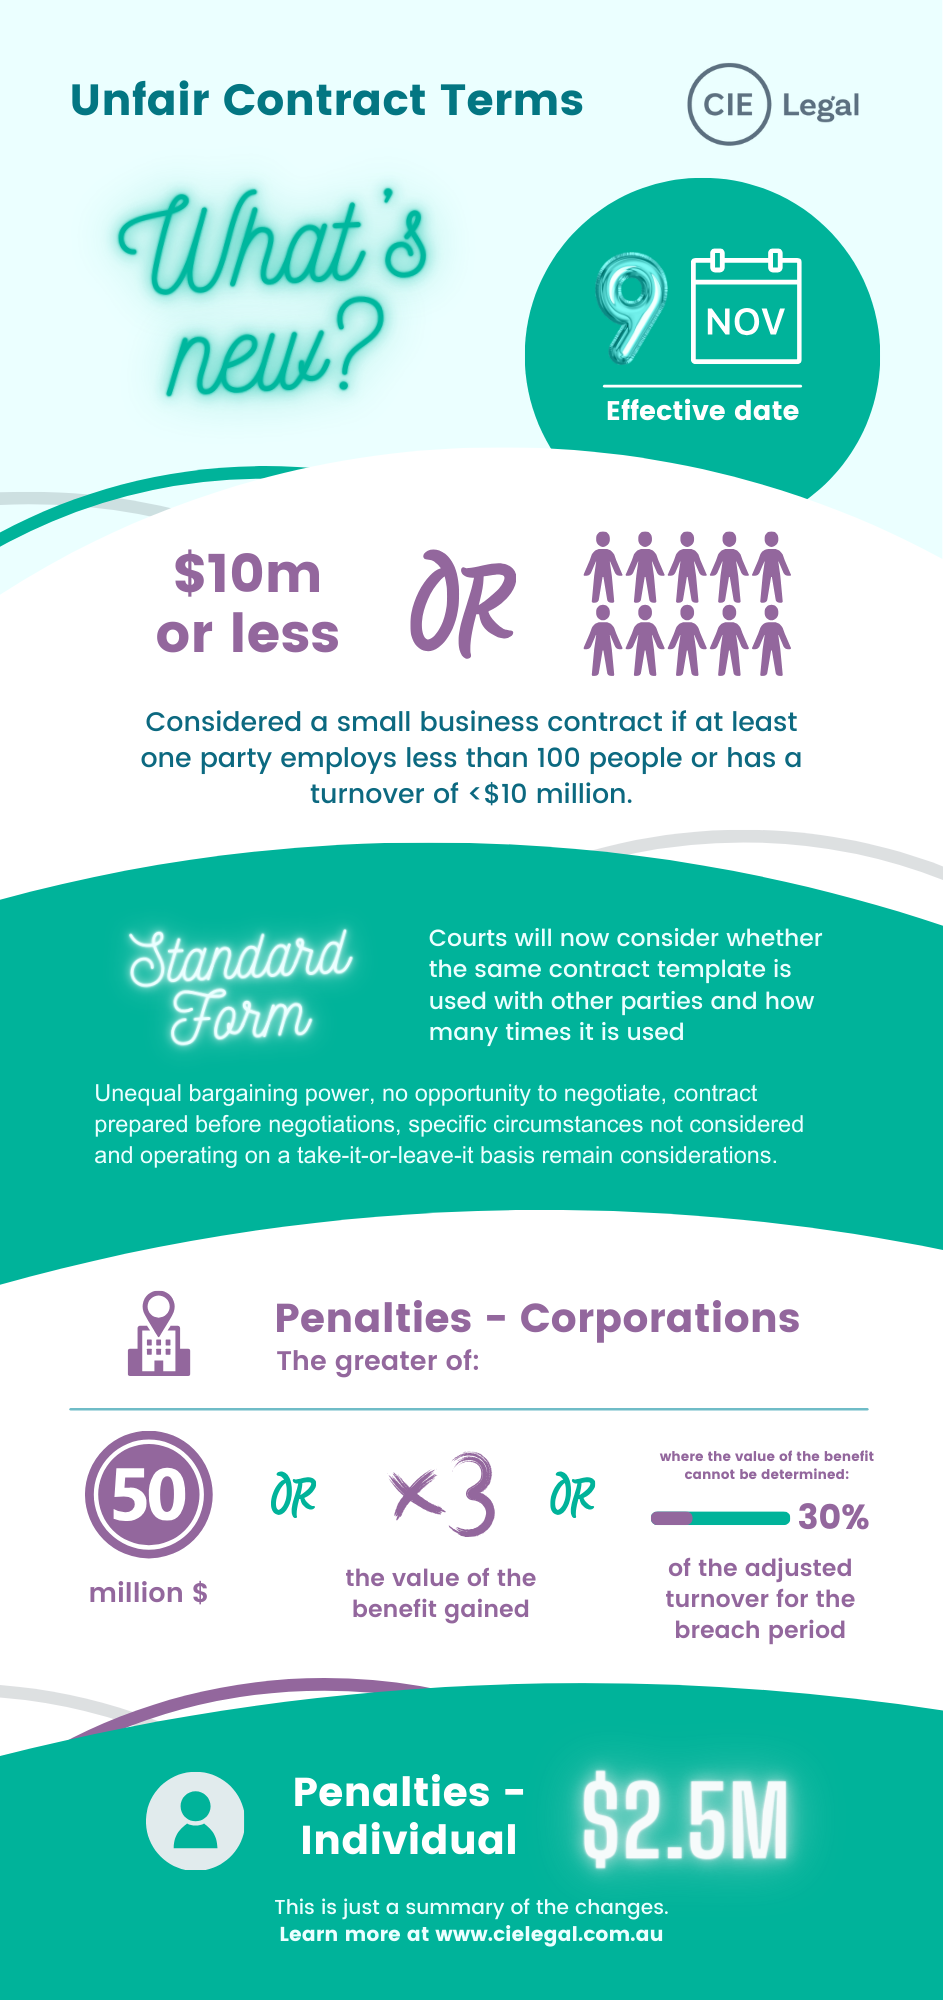 Unfair Contract Terms infographic